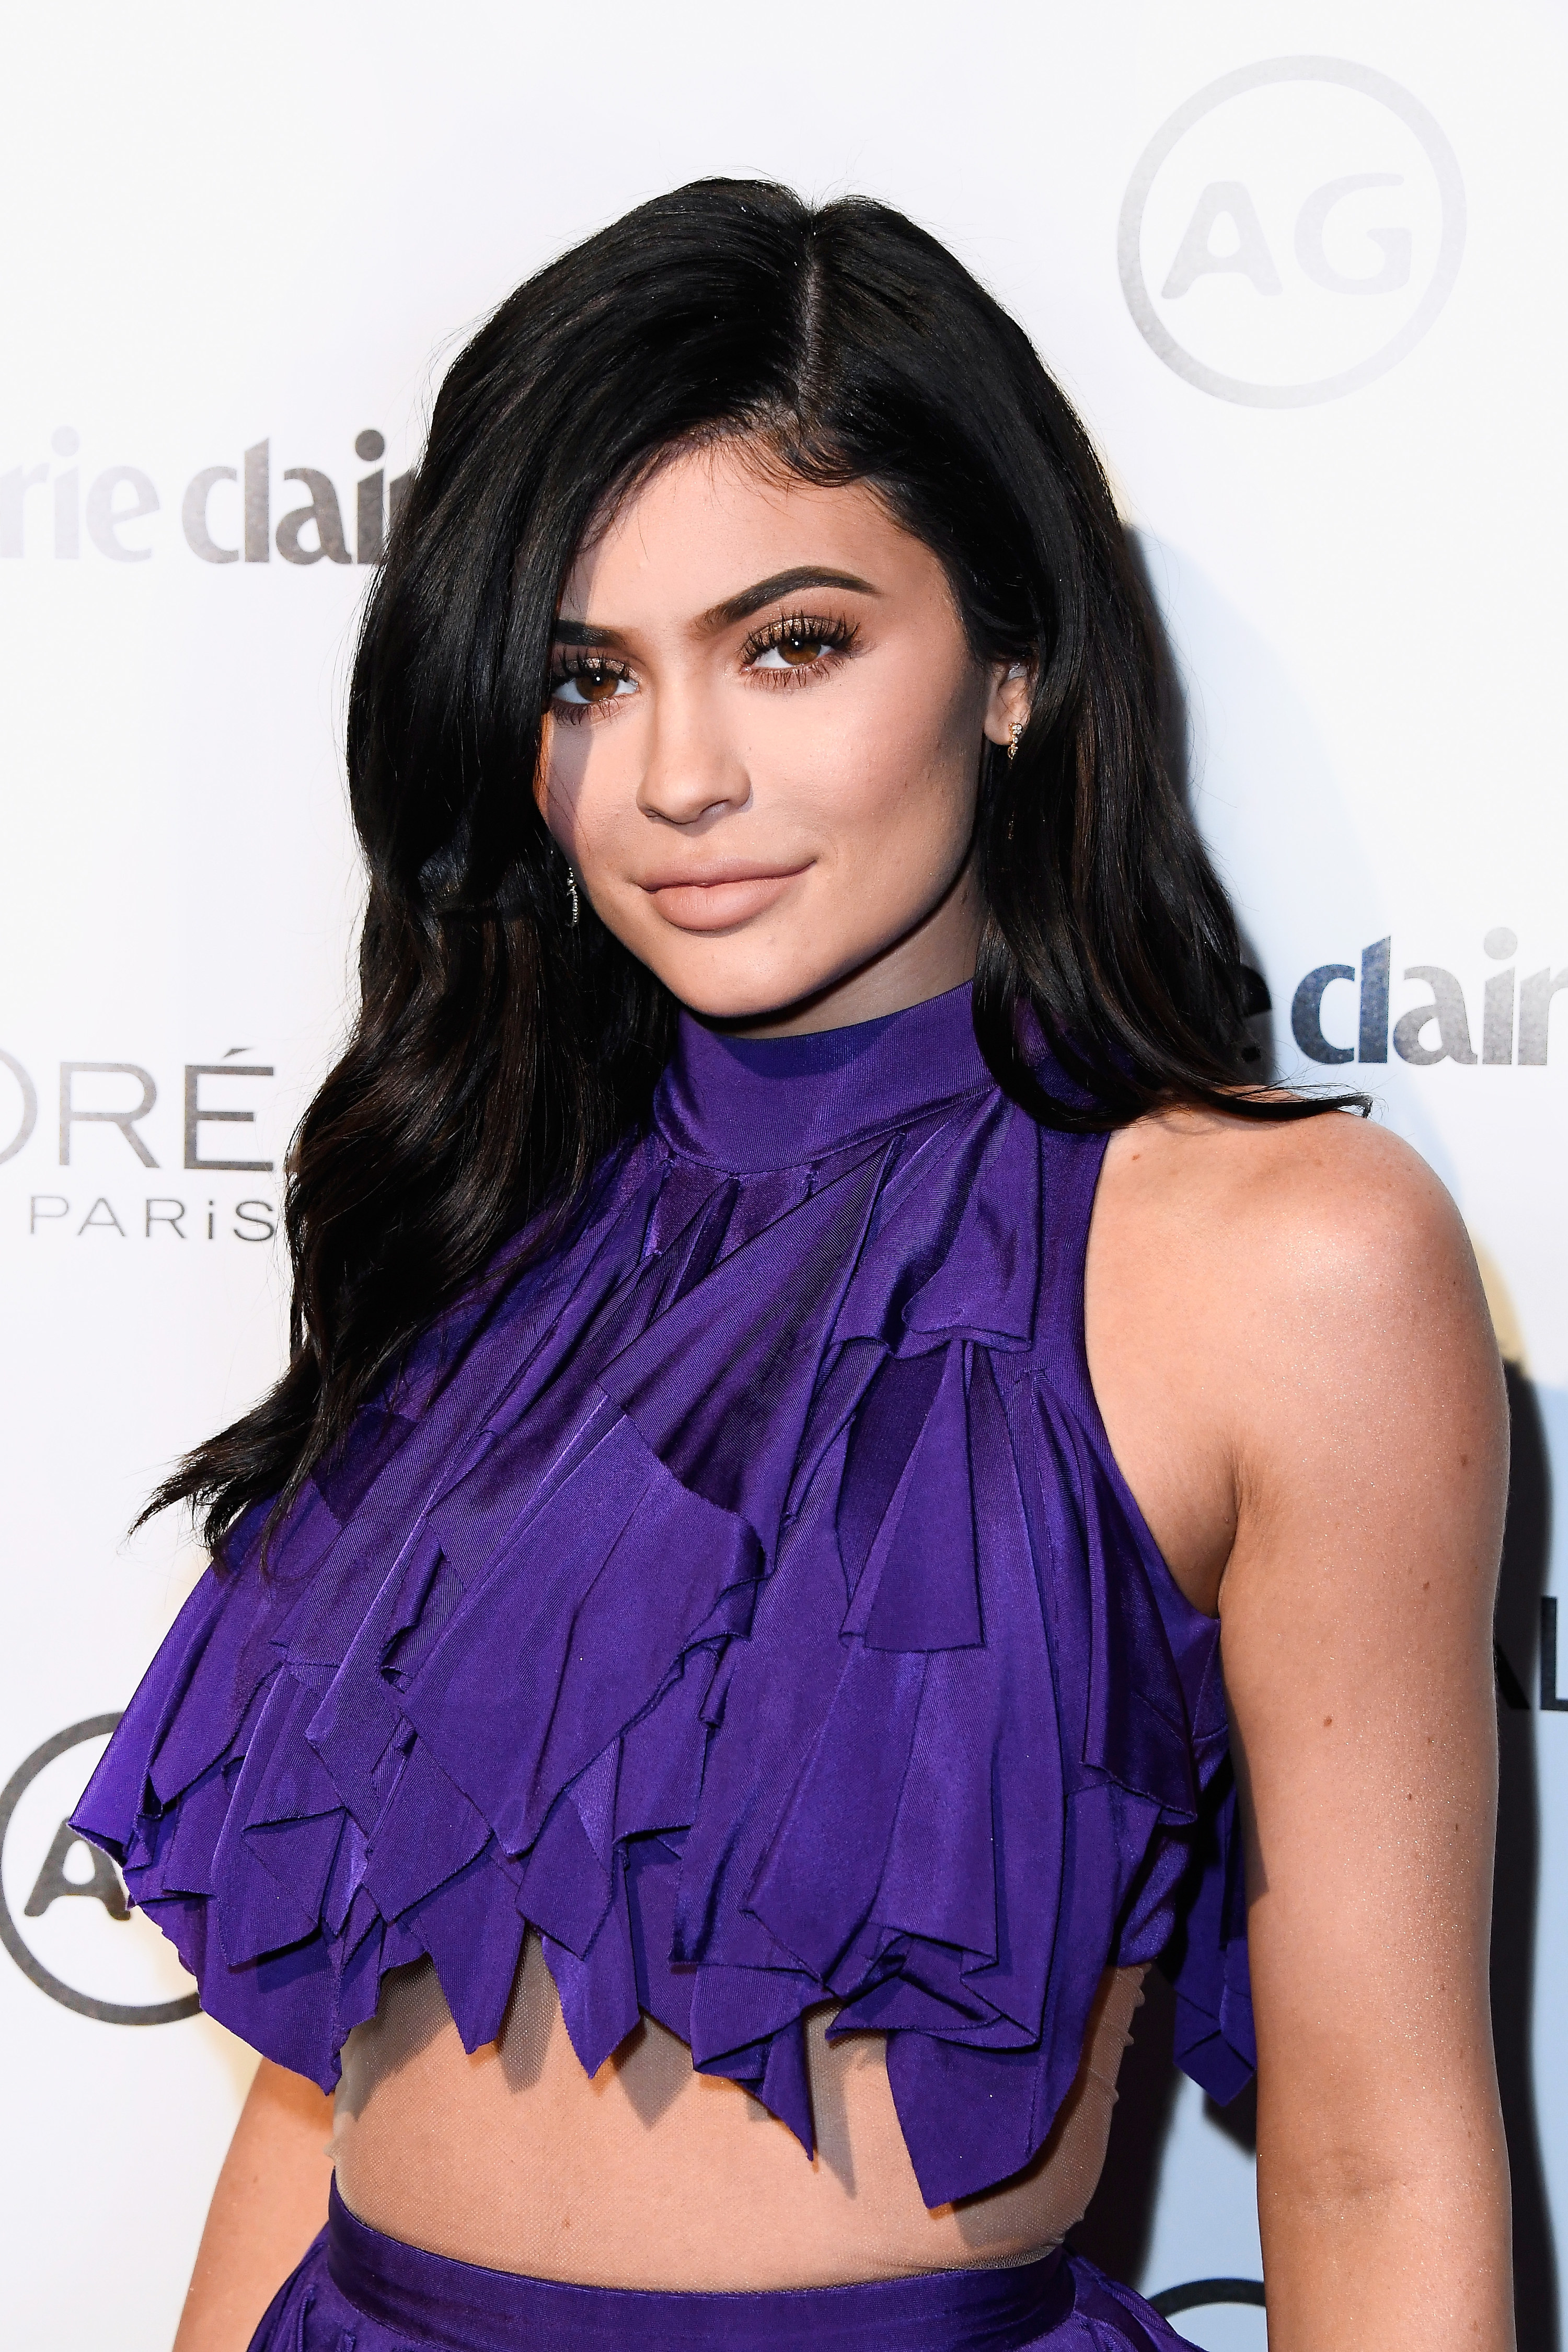 Kylie Jenner Opens Up About Embracing Her Postpartum Body